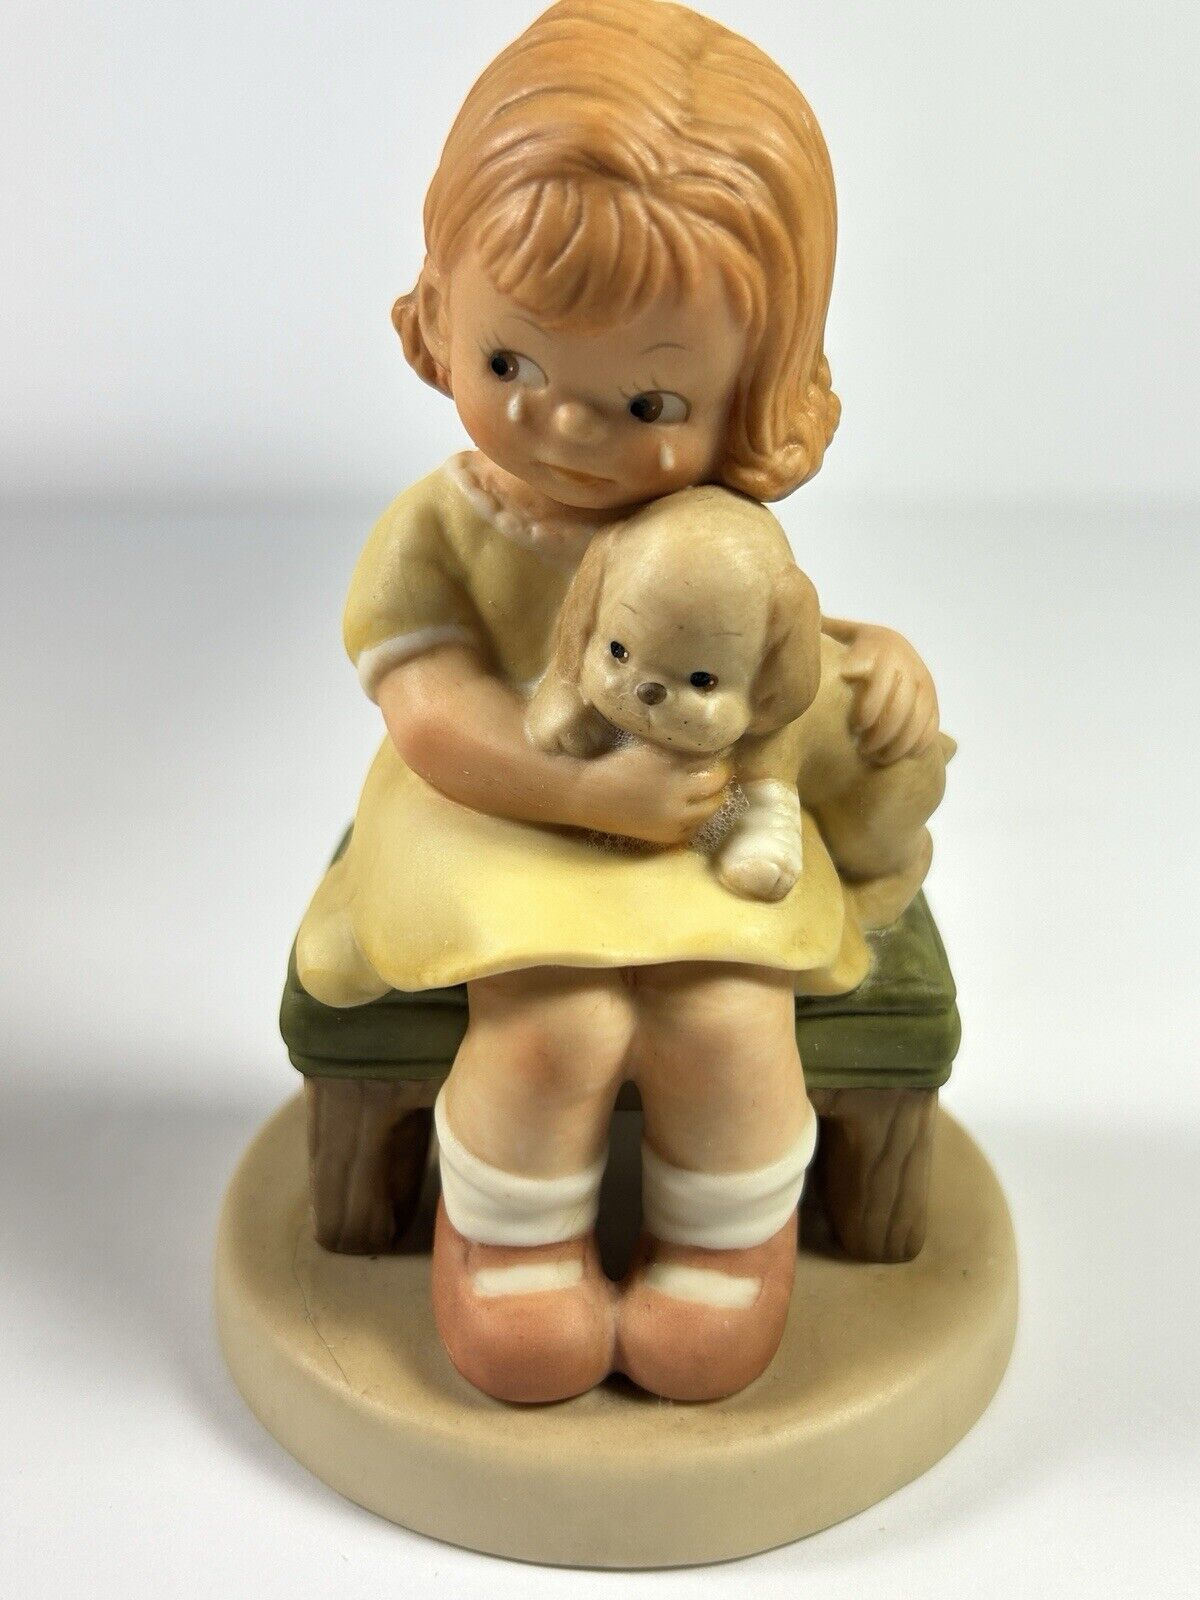 Enesco Memories of Yesterday “It Hurts When Fido Hurts” 1987 Lucy Attwell